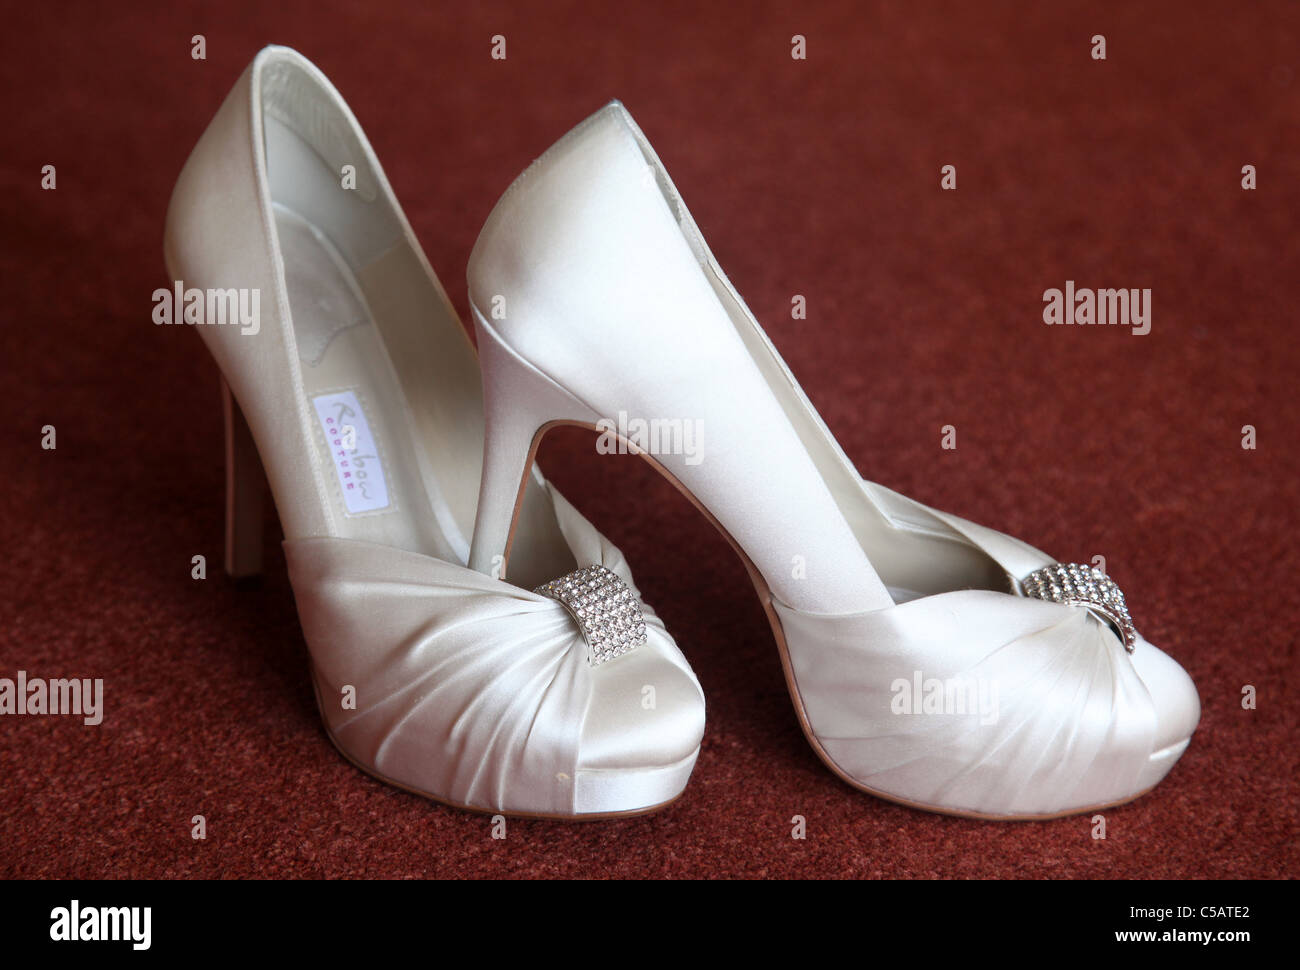 Bridal Wedding Shoes With I Do Message On Sole Isolated On White  Background. Marriage Concept Stock Photo, Picture and Royalty Free Image.  Image 26818048.